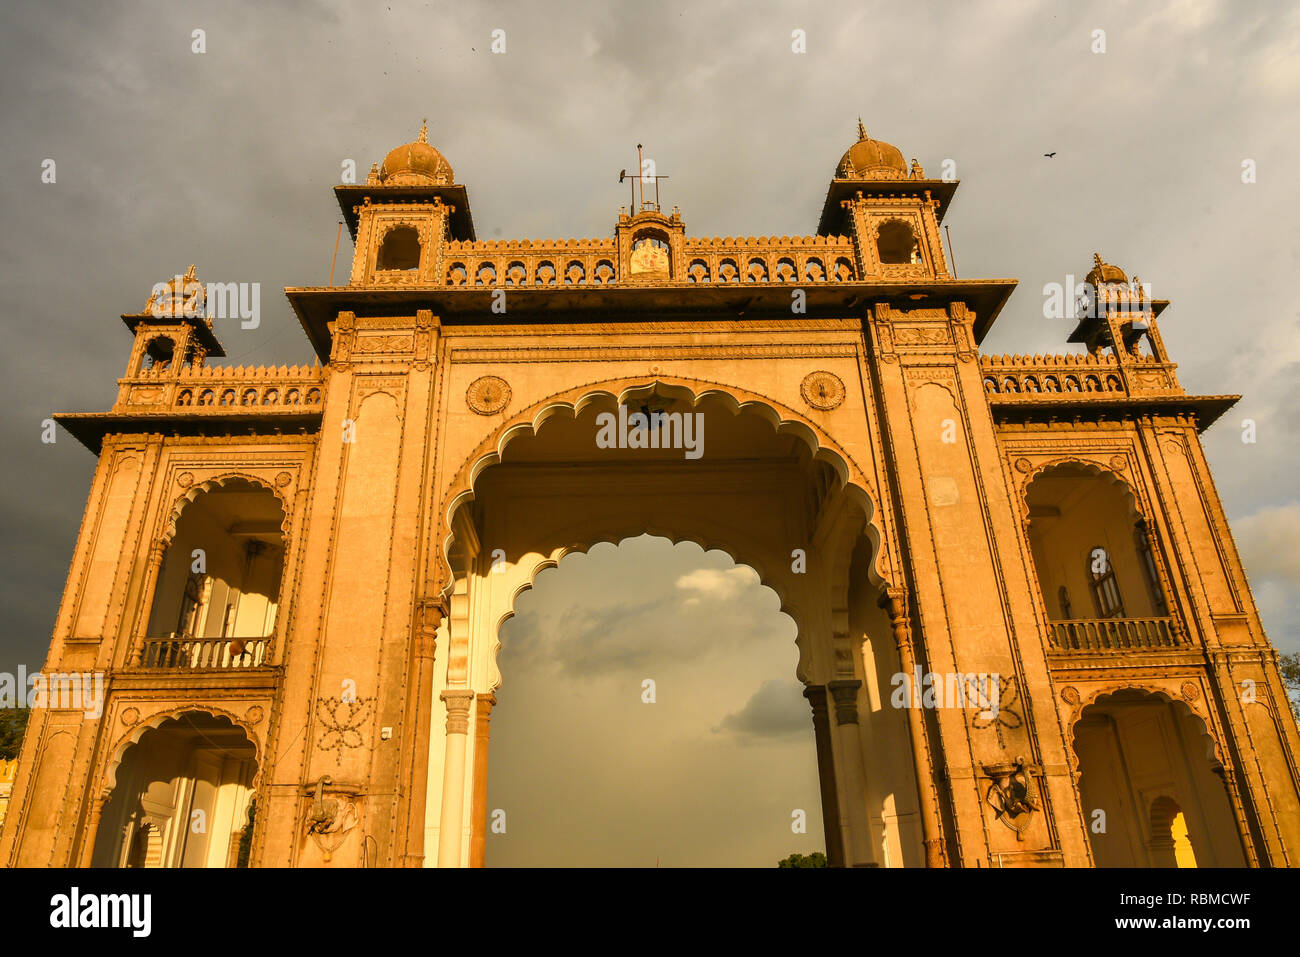 Main entrance gate to the Mysore palace of Indian Maharaja or king ...